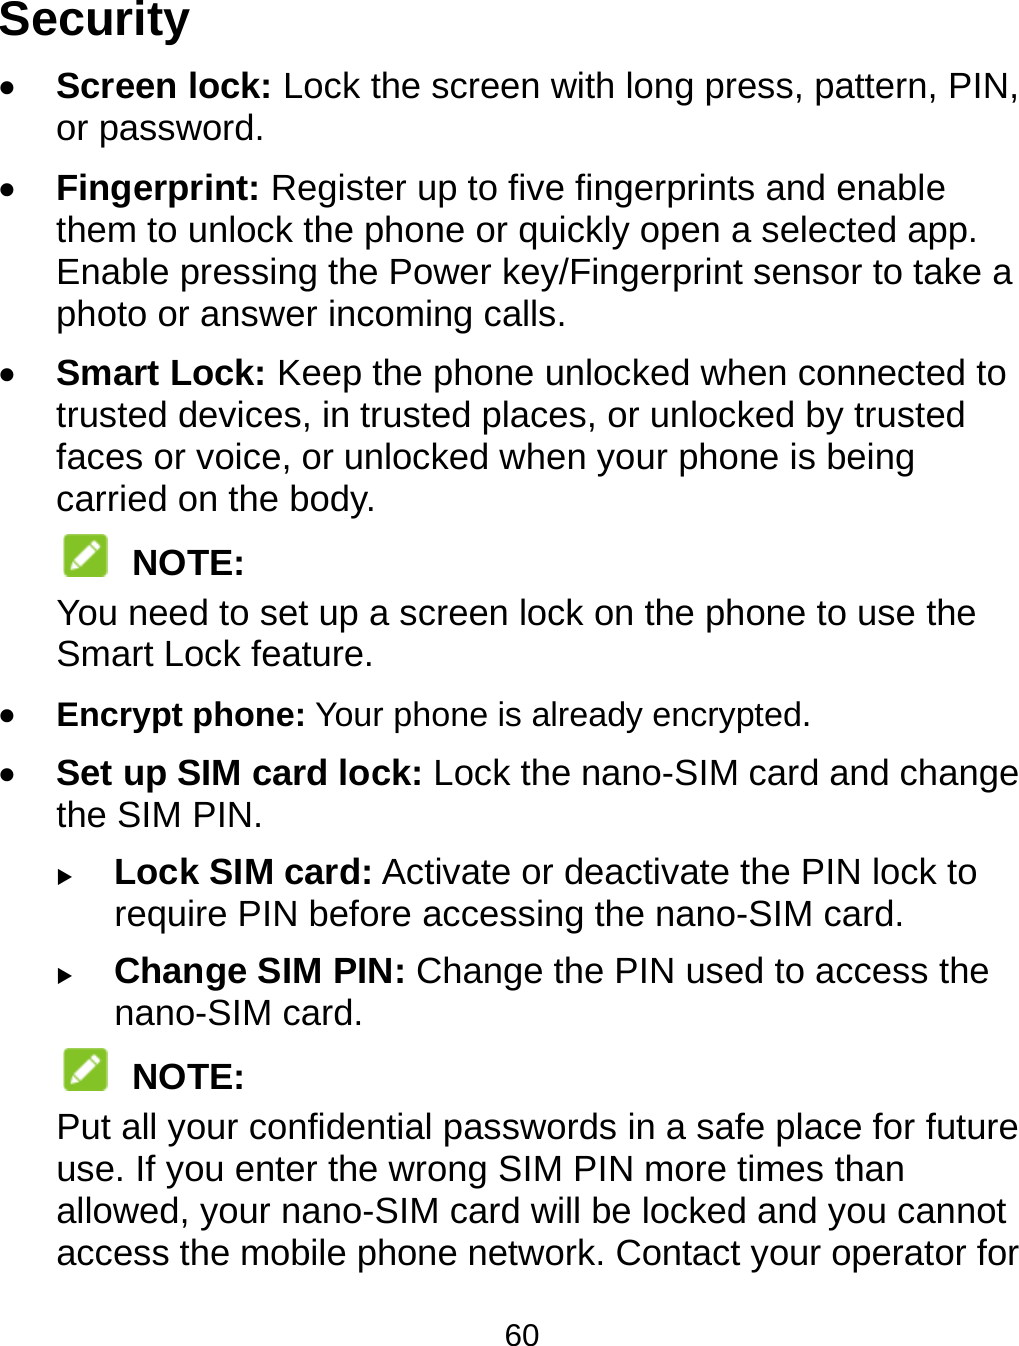  60 Security  Screen lock: Lock the screen with long press, pattern, PIN, or password.    Fingerprint: Register up to five fingerprints and enable them to unlock the phone or quickly open a selected app. Enable pressing the Power key/Fingerprint sensor to take a photo or answer incoming calls.  Smart Lock: Keep the phone unlocked when connected to trusted devices, in trusted places, or unlocked by trusted faces or voice, or unlocked when your phone is being carried on the body.  NOTE: You need to set up a screen lock on the phone to use the Smart Lock feature.  Encrypt phone: Your phone is already encrypted.  Set up SIM card lock: Lock the nano-SIM card and change the SIM PIN.  Lock SIM card: Activate or deactivate the PIN lock to require PIN before accessing the nano-SIM card.  Change SIM PIN: Change the PIN used to access the nano-SIM card.  NOTE: Put all your confidential passwords in a safe place for future use. If you enter the wrong SIM PIN more times than allowed, your nano-SIM card will be locked and you cannot access the mobile phone network. Contact your operator for 